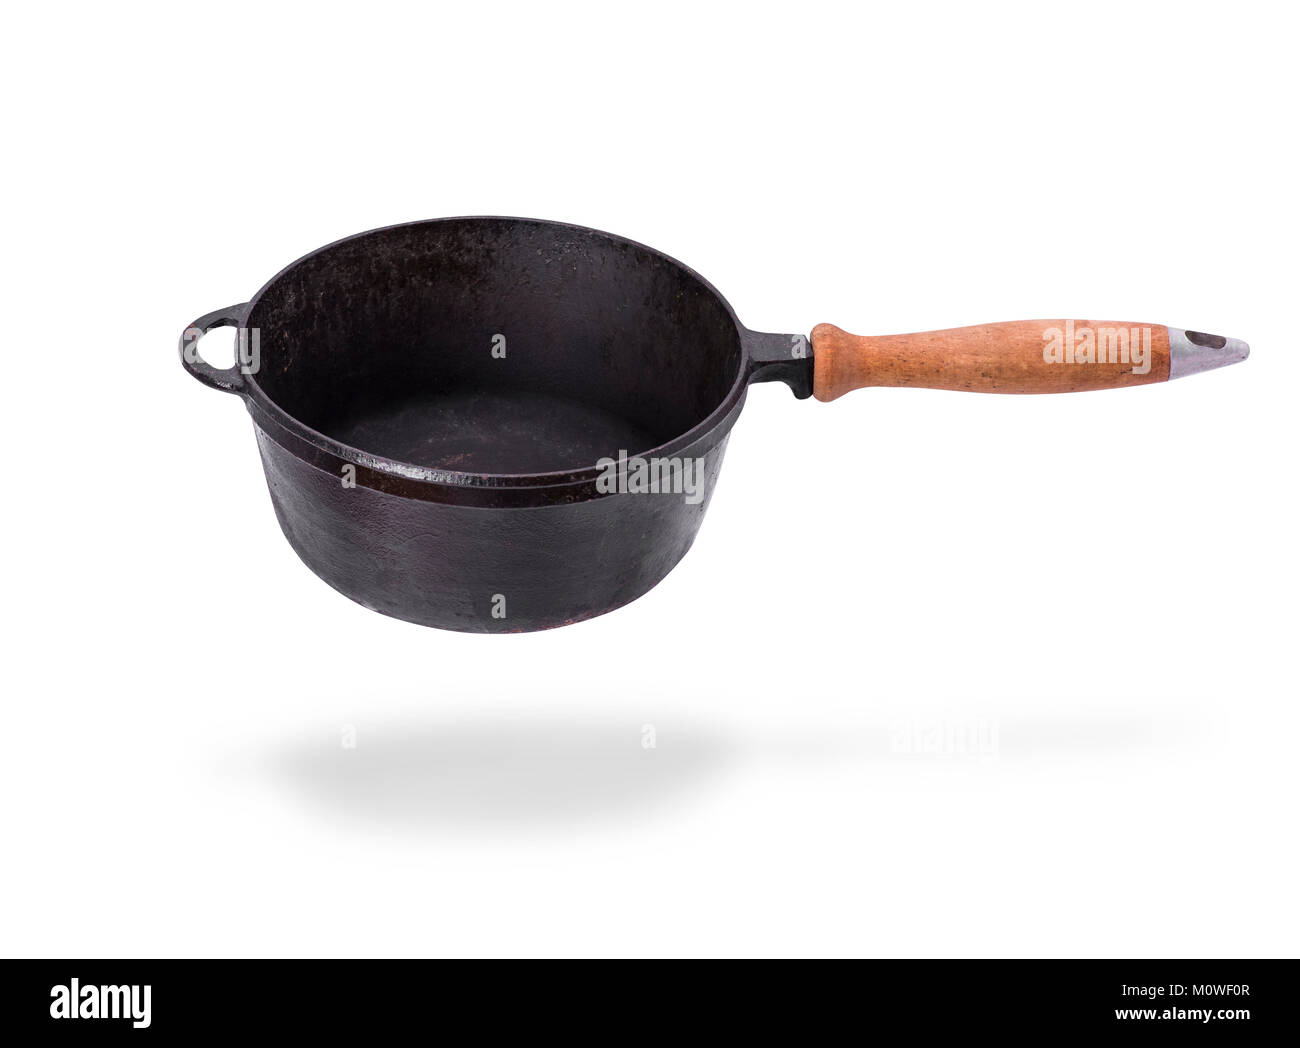 https://c8.alamy.com/comp/M0WF0R/deep-old-black-cast-iron-frying-pan-with-wooden-handle-isolated-on-M0WF0R.jpg